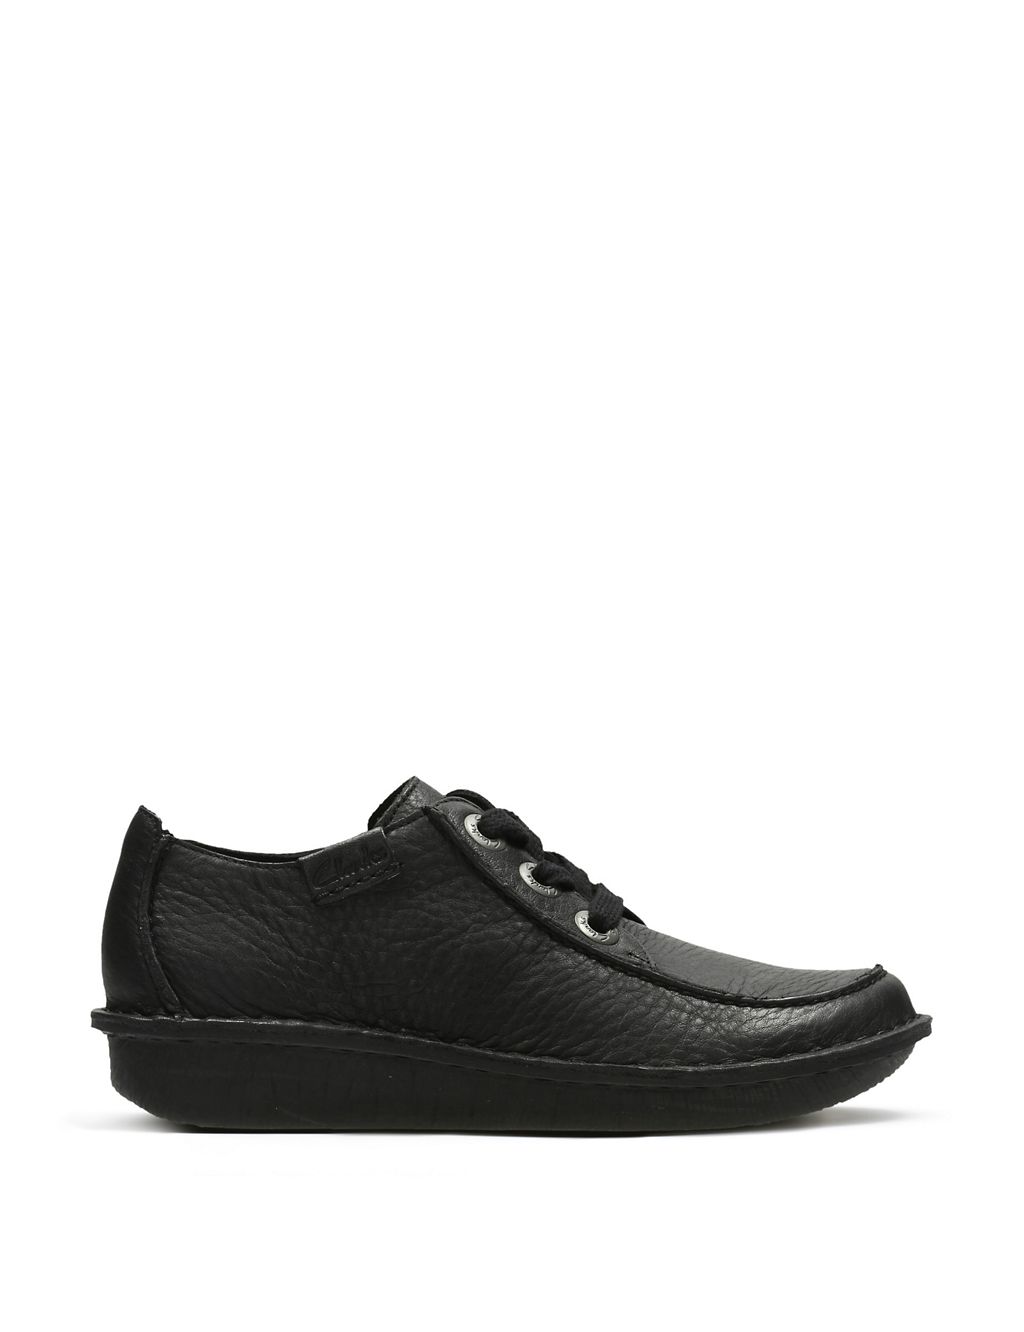 Leather Lace Up Flatform Brogues | CLARKS | M&S